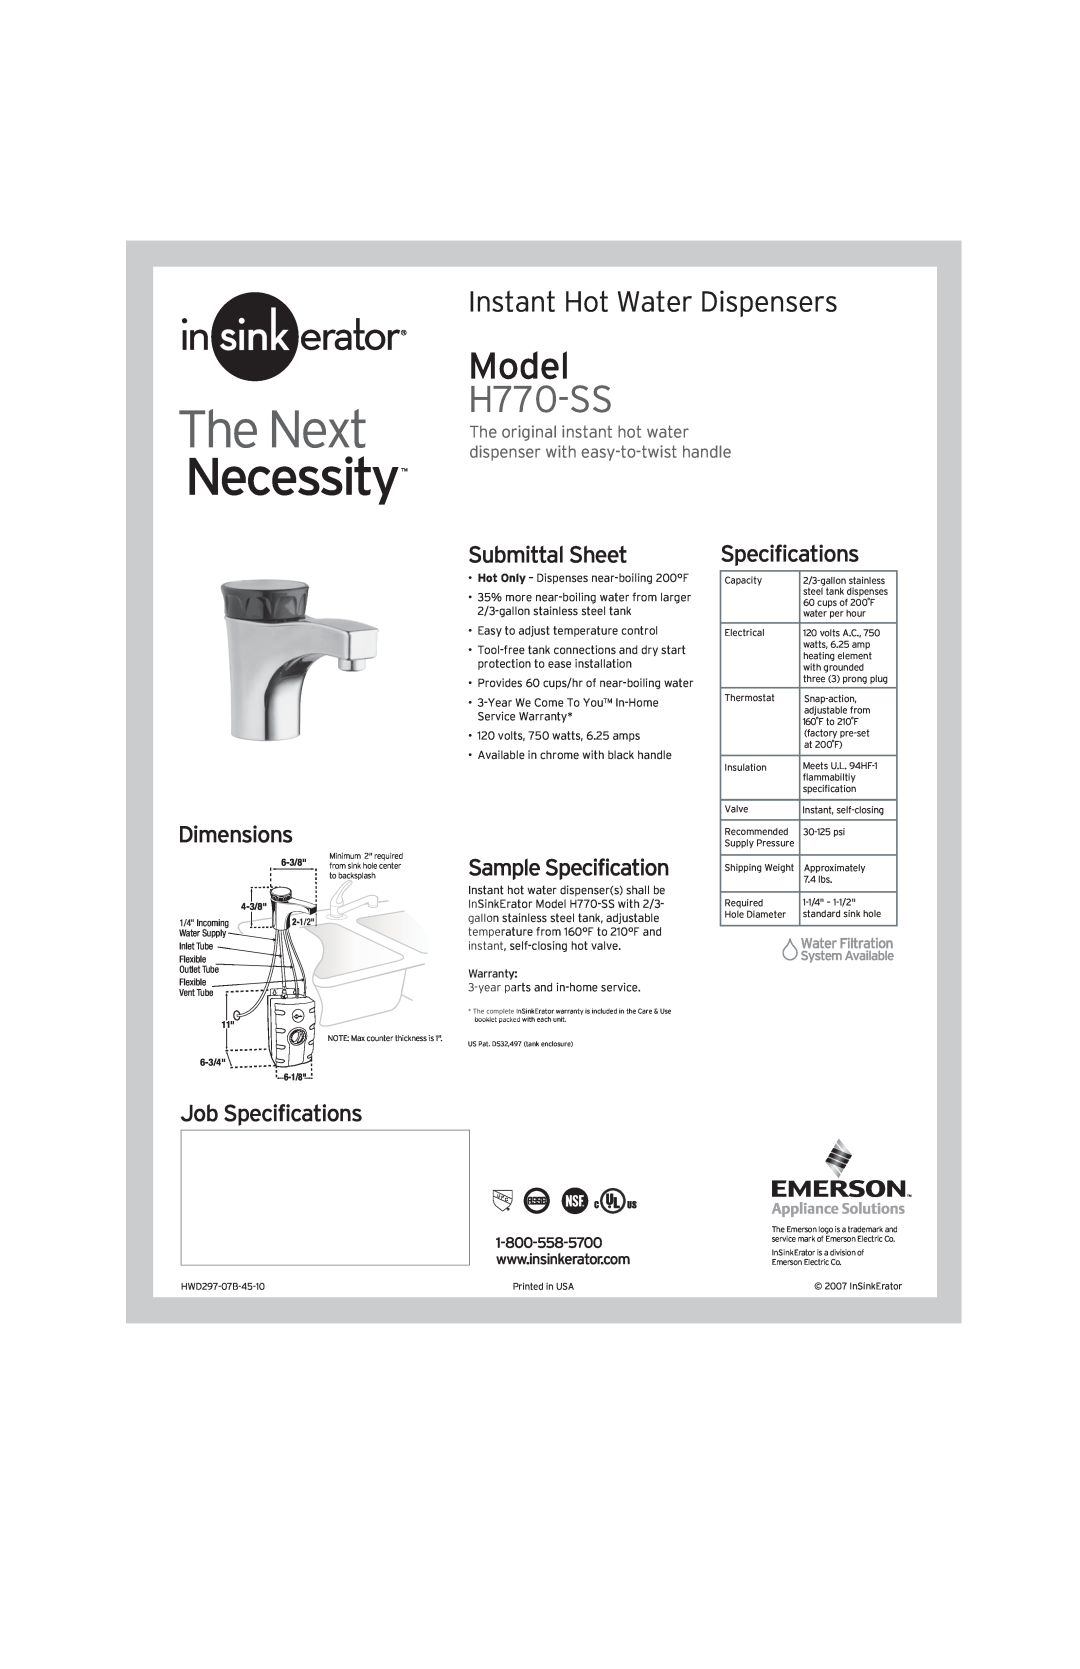 InSinkErator H770-SS dimensions The Next, Necessity, Model, Instant Hot Water Dispensers, Submittal Sheet, Specifications 